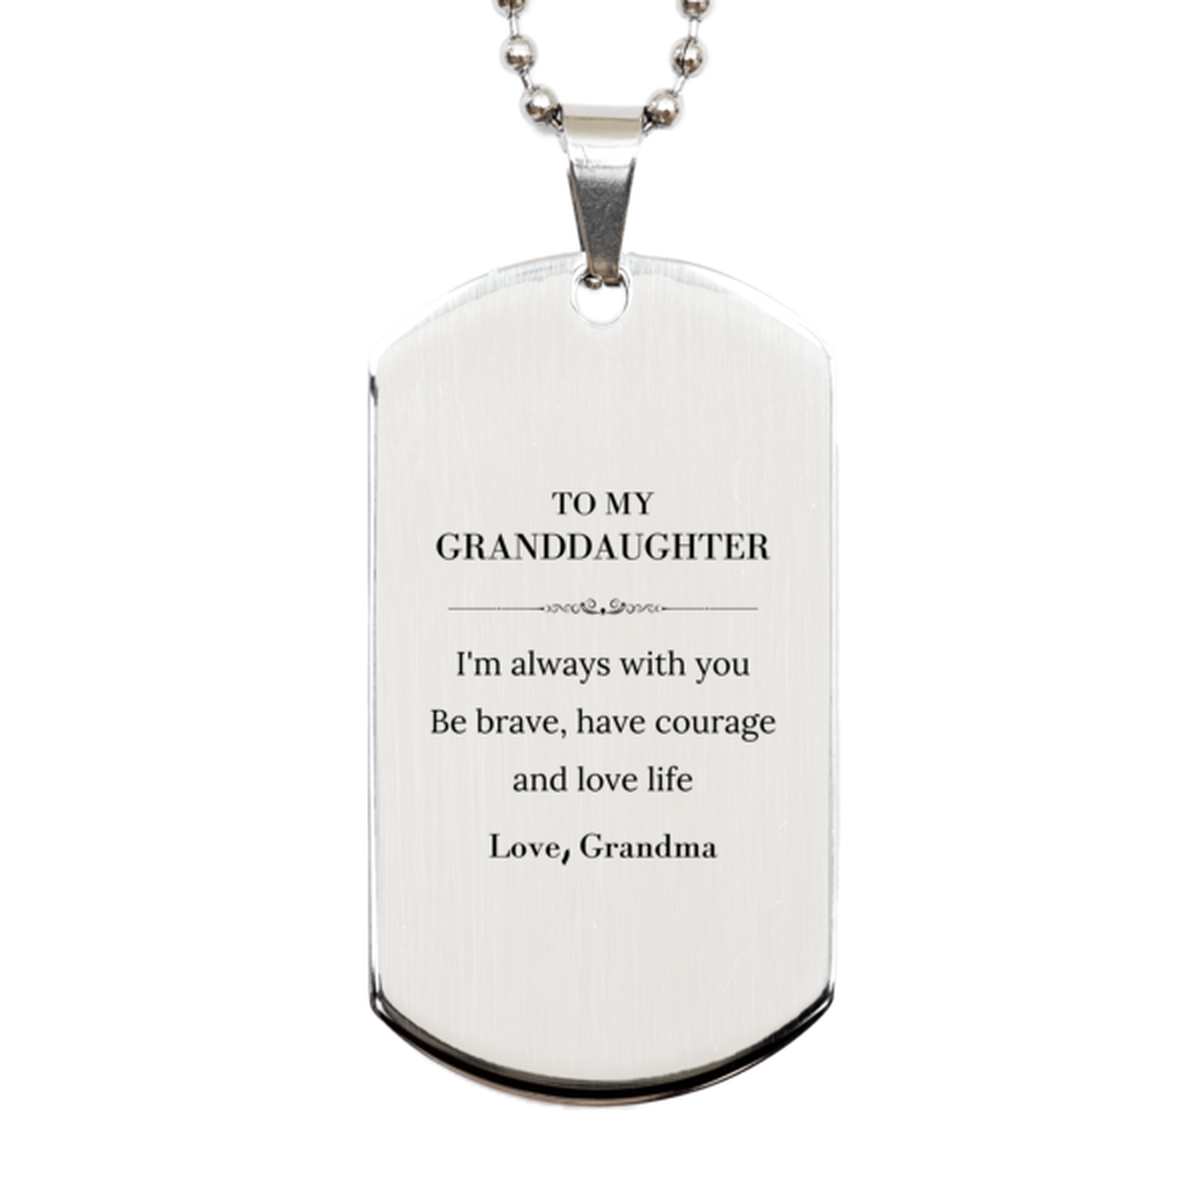 To My Granddaughter Gifts from Grandma, Unique Silver Dog Tag Inspirational Christmas Birthday Graduation Gifts for Granddaughter I'm always with you. Be brave, have courage and love life. Love, Grandma